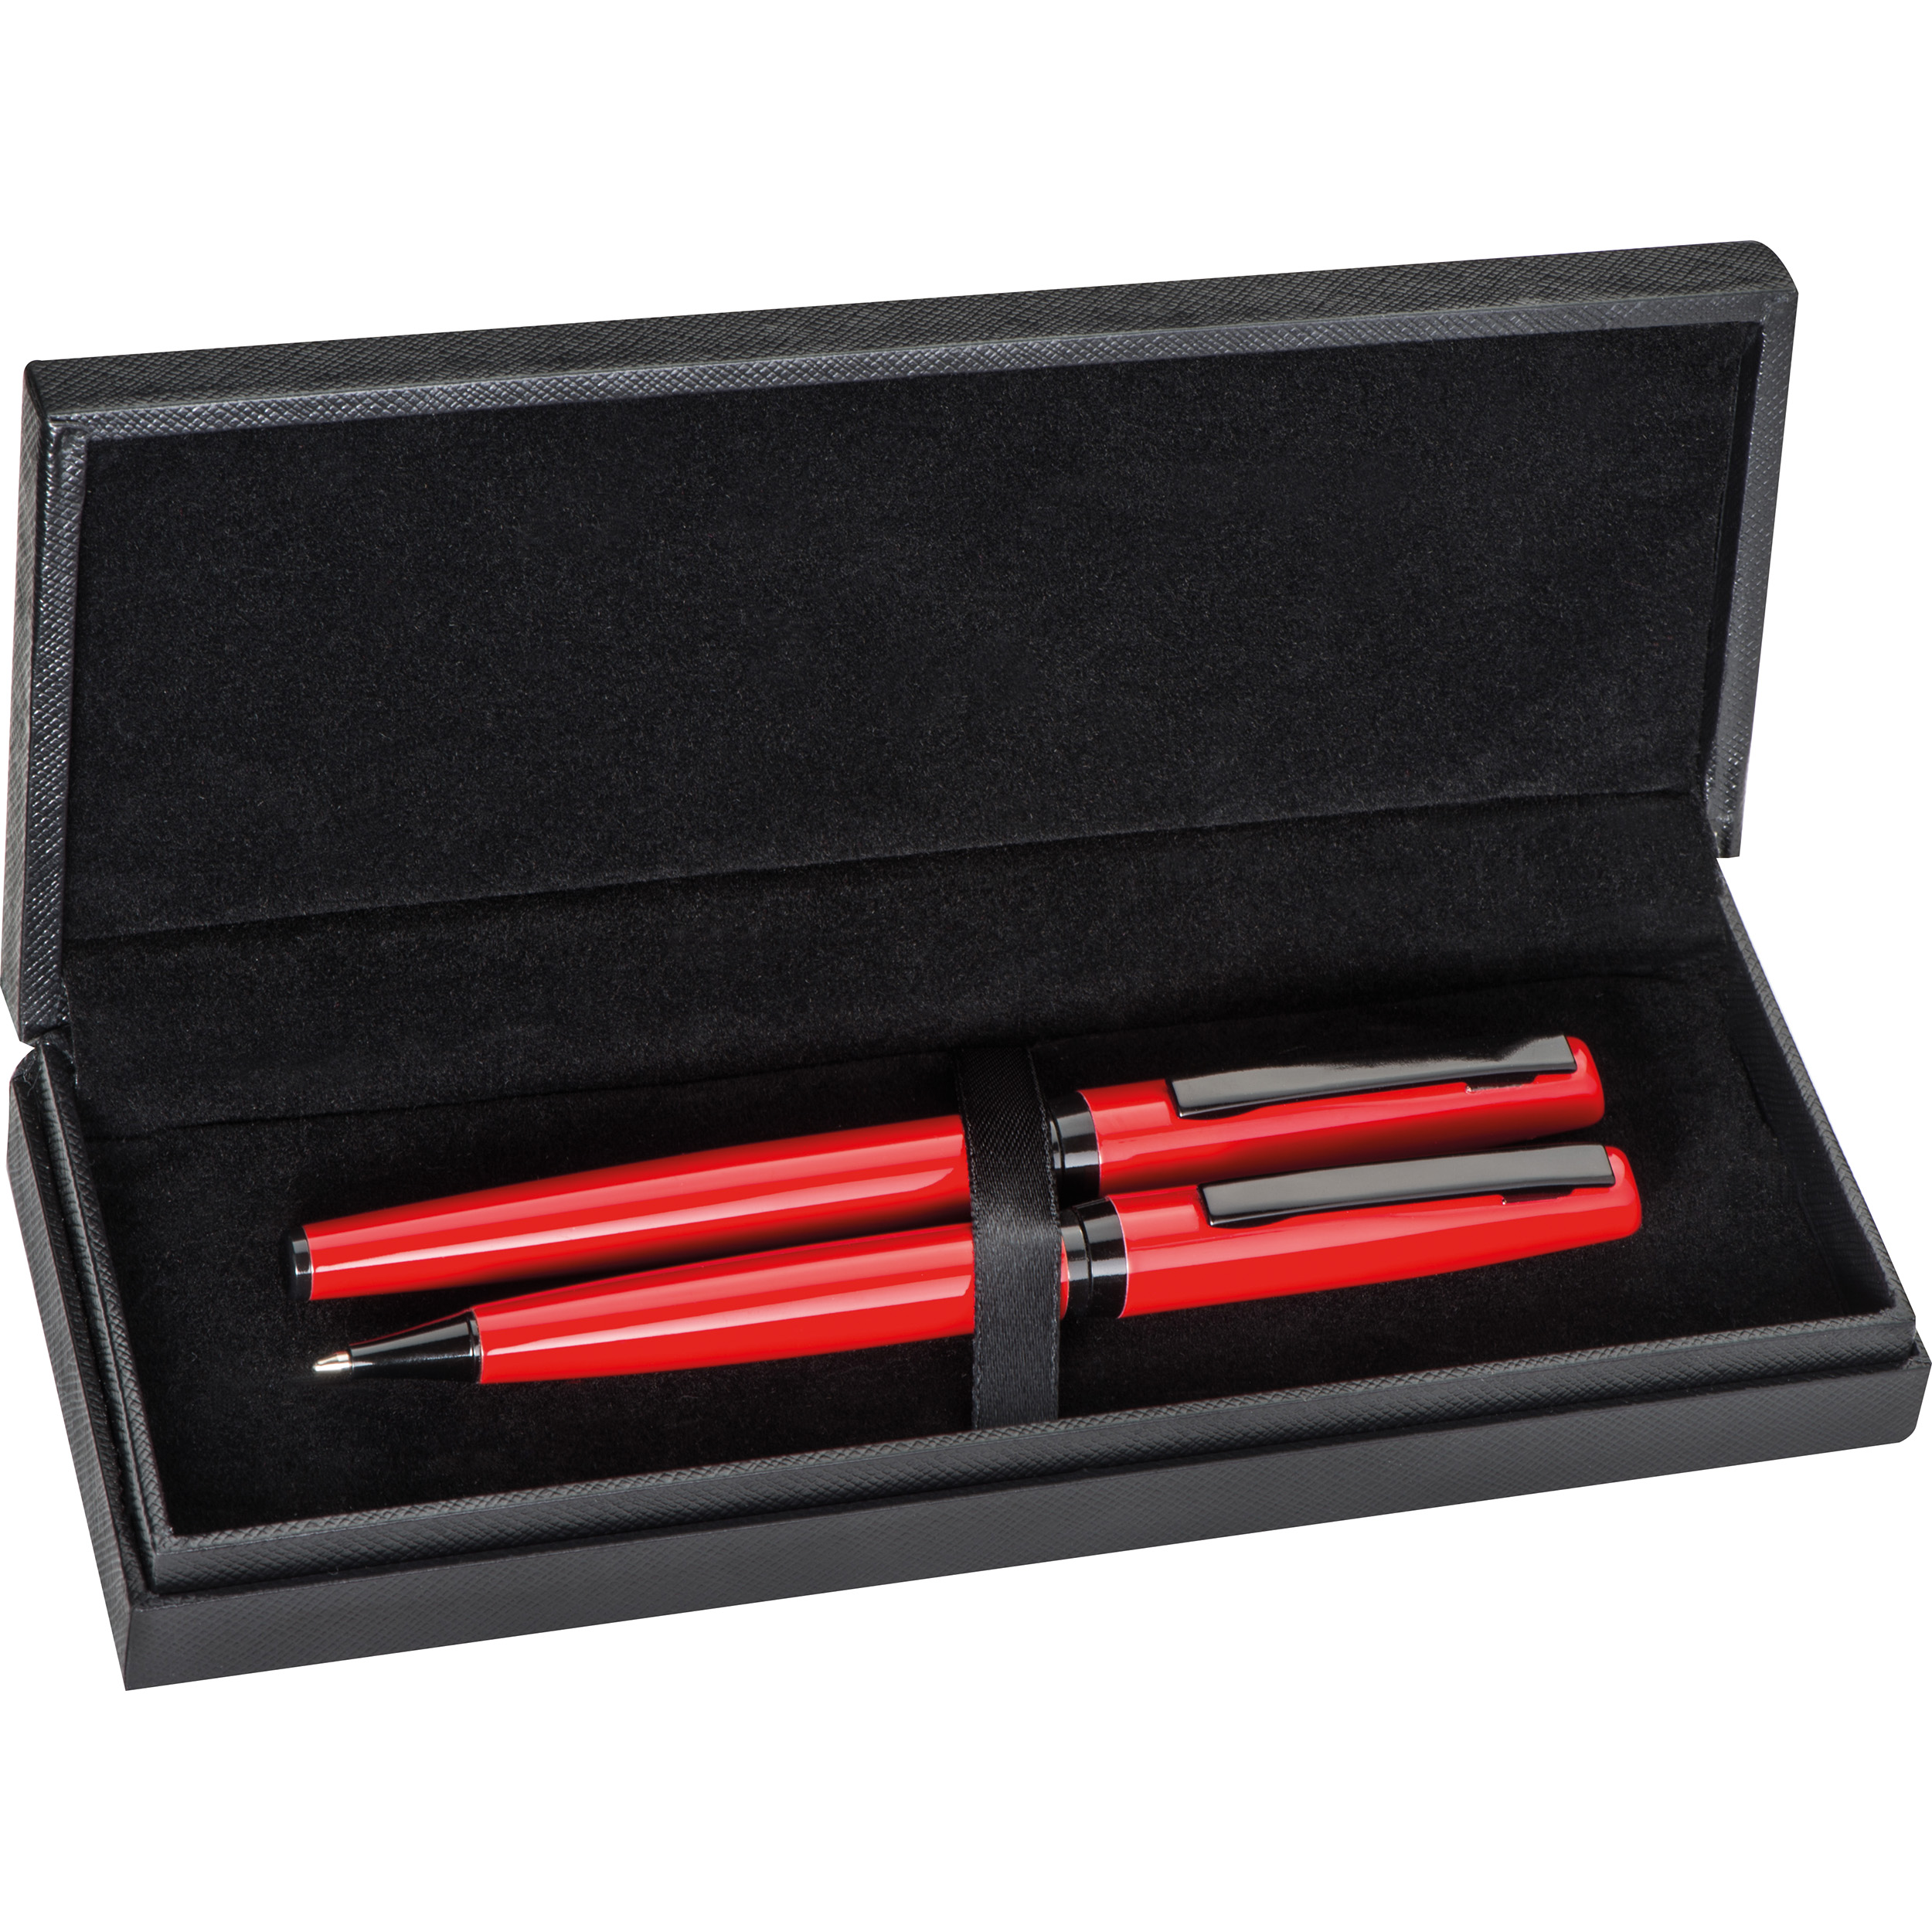 Writing set - red with black accents